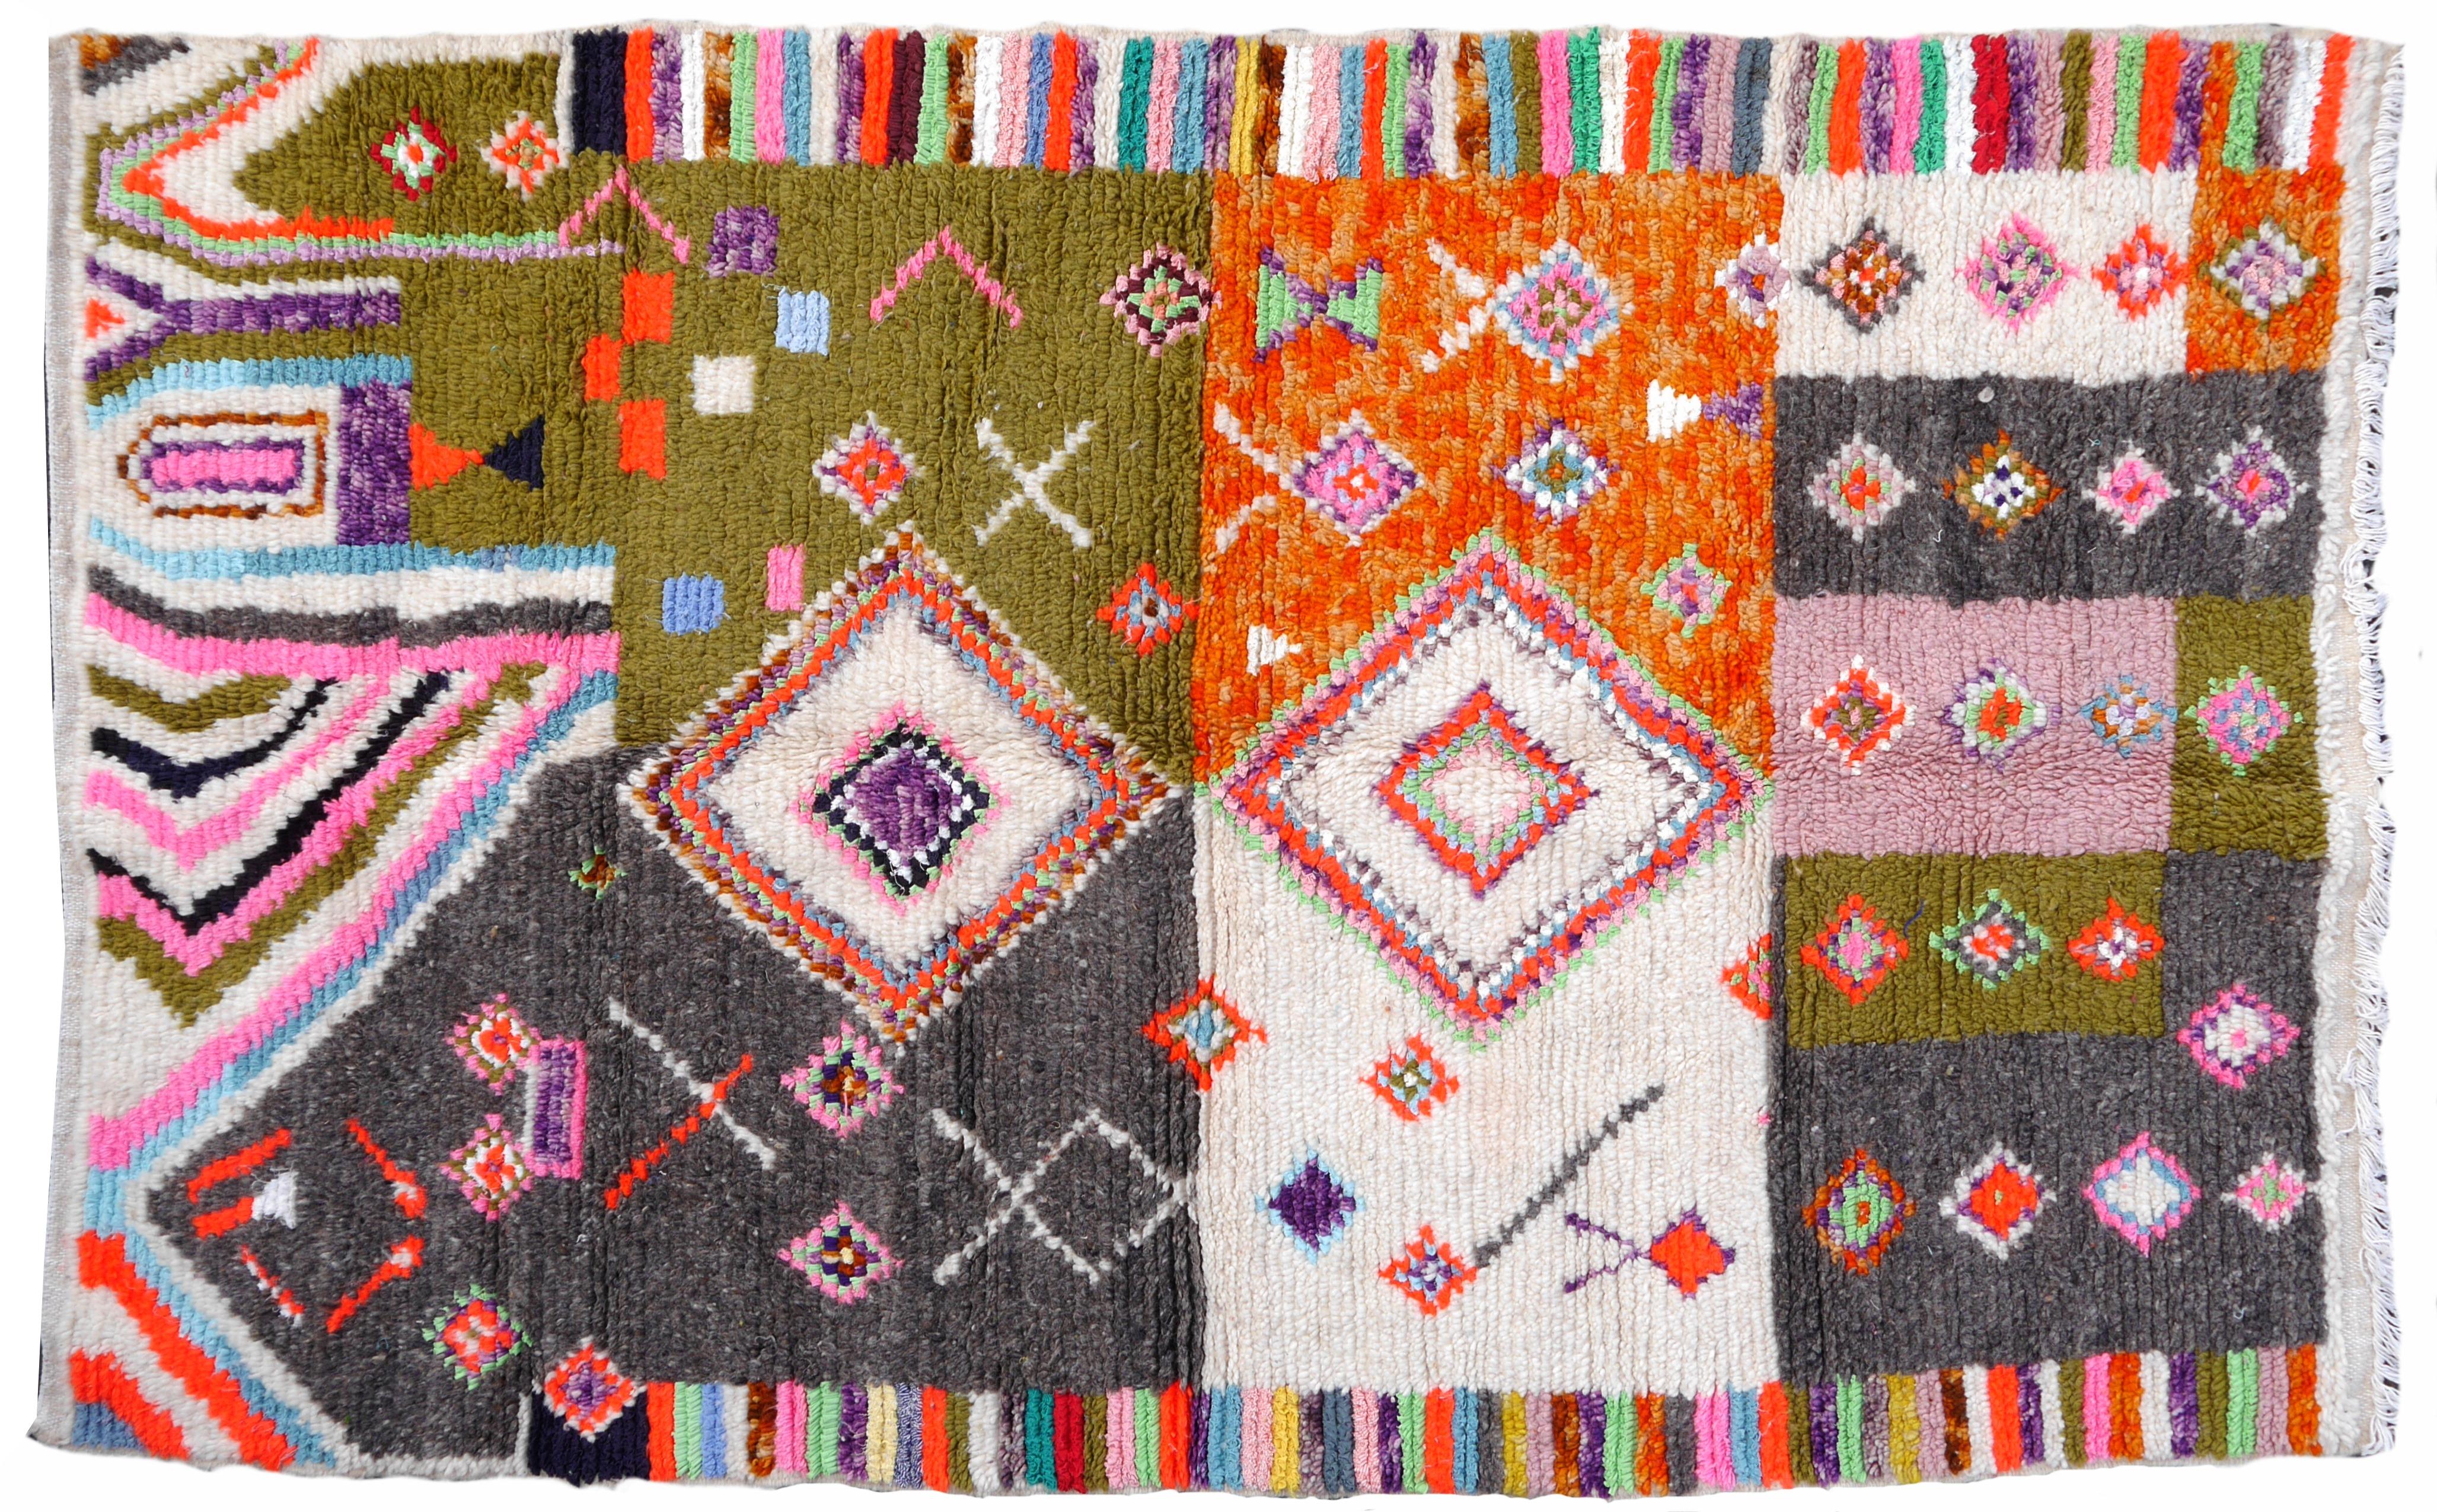 Berber rugs and carpets are mainly made in Morocco, Tunesia and Algeria. Largest producer are the tribal and nomadic Berber people of Morocco. Different areas produce very beautiful works of art. 

This rug was made in a village in the Atlas